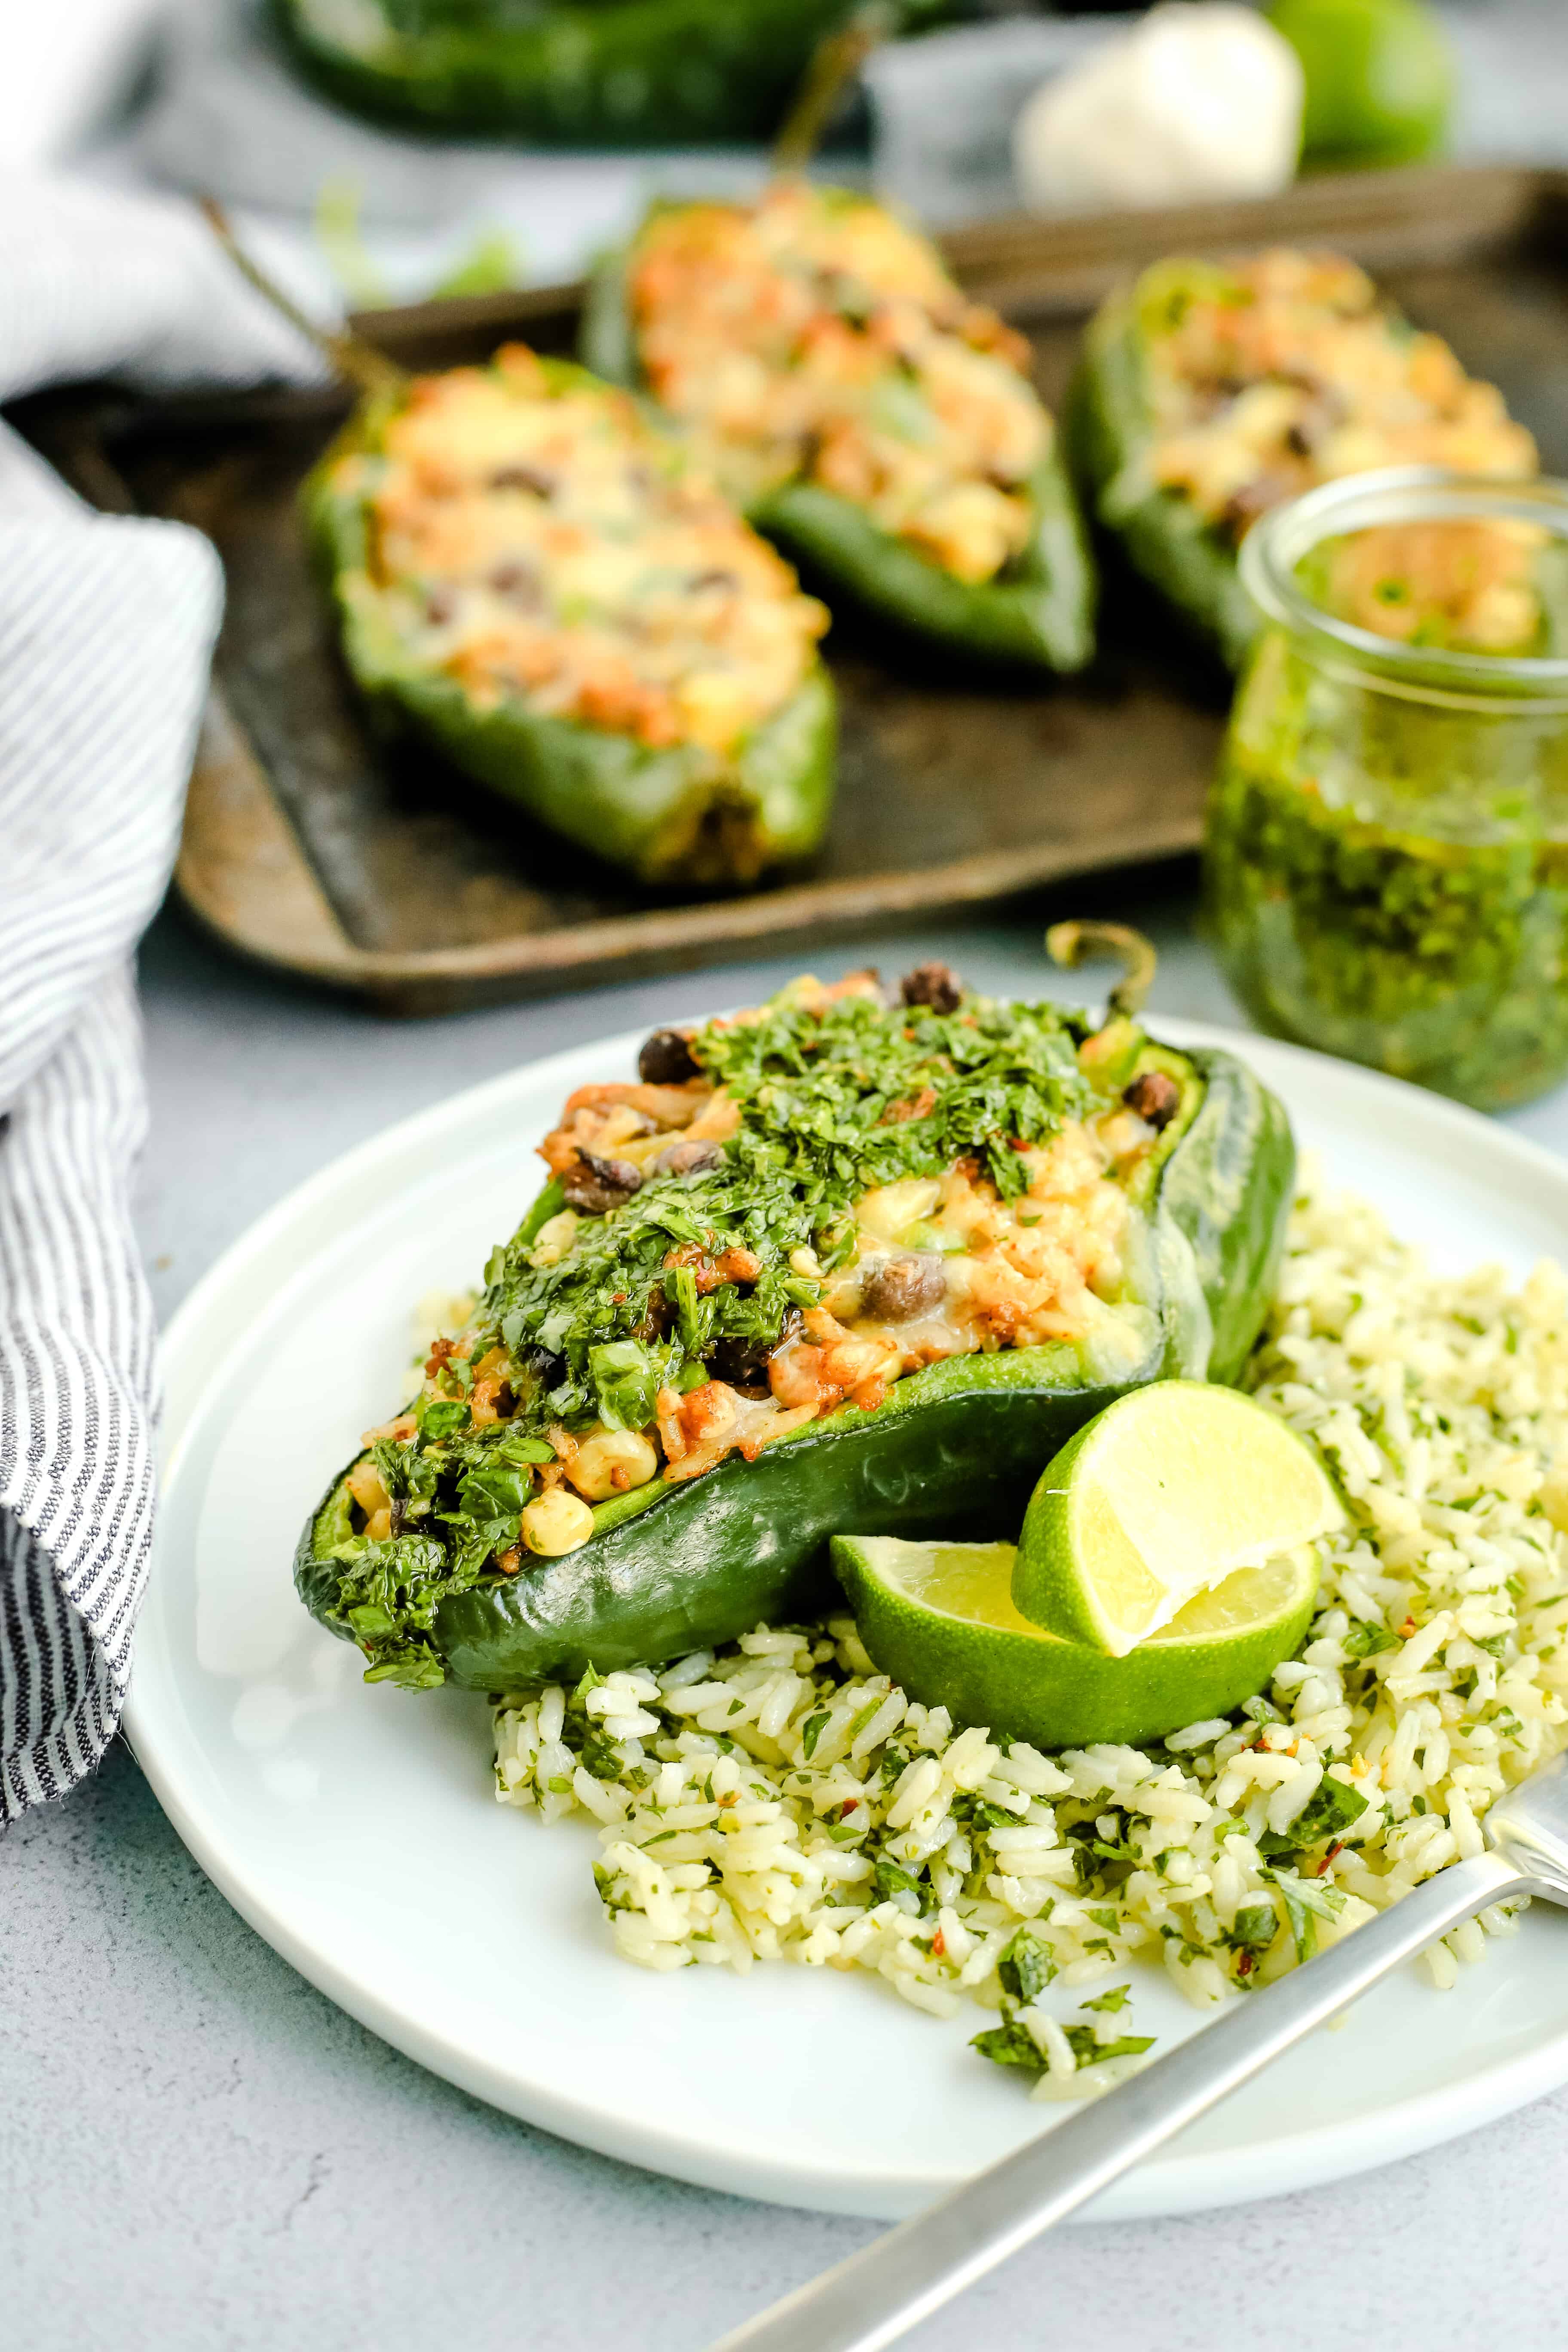 Image of Stuffed Poblano Peppers with Chimichurri Rice and Chorizo, with extra herbs and lime wedges for garnish, served on a white ceramic plate on a kitchen countertop